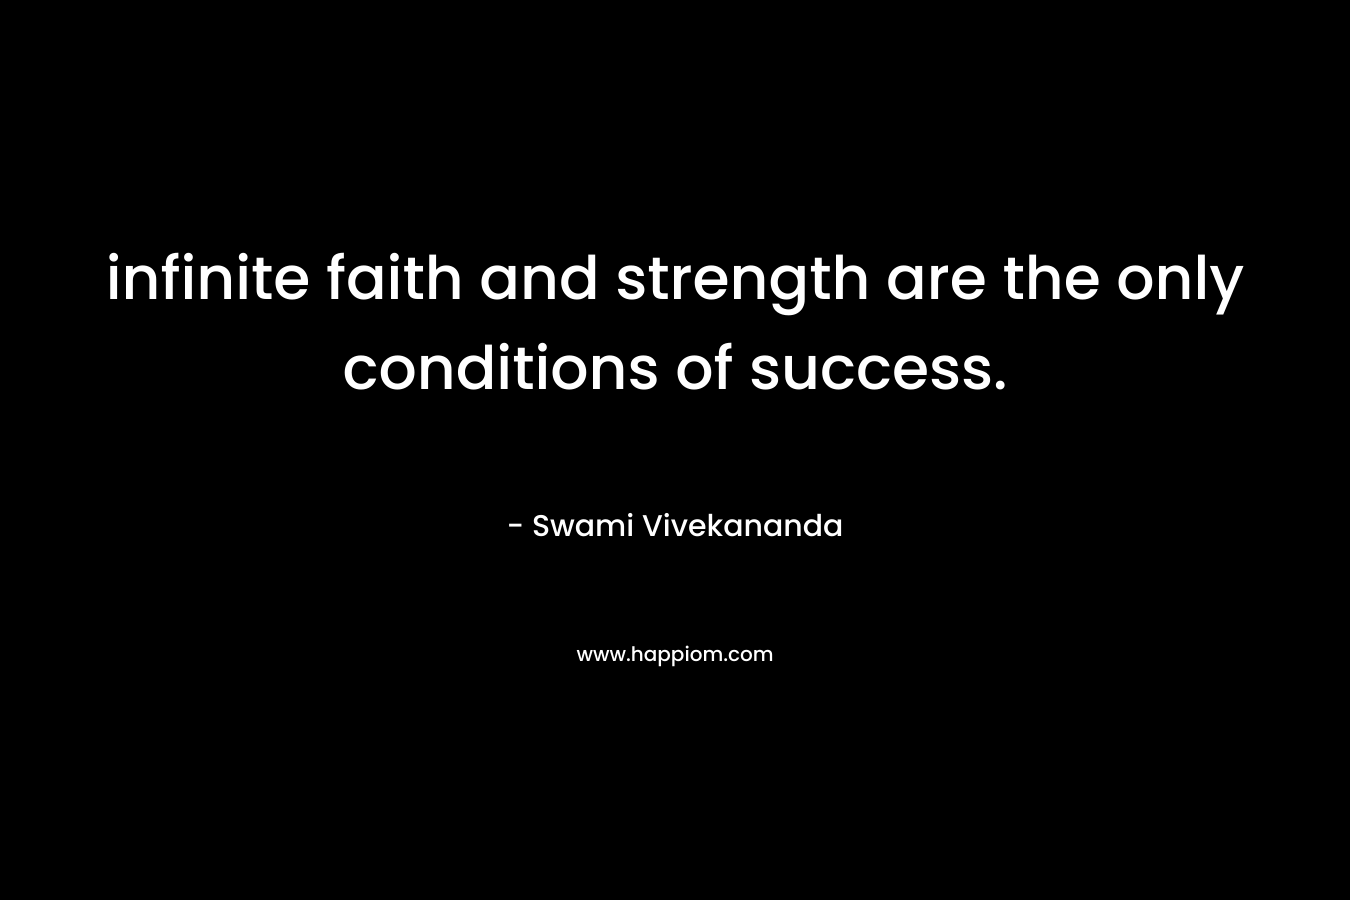 infinite faith and strength are the only conditions of success.